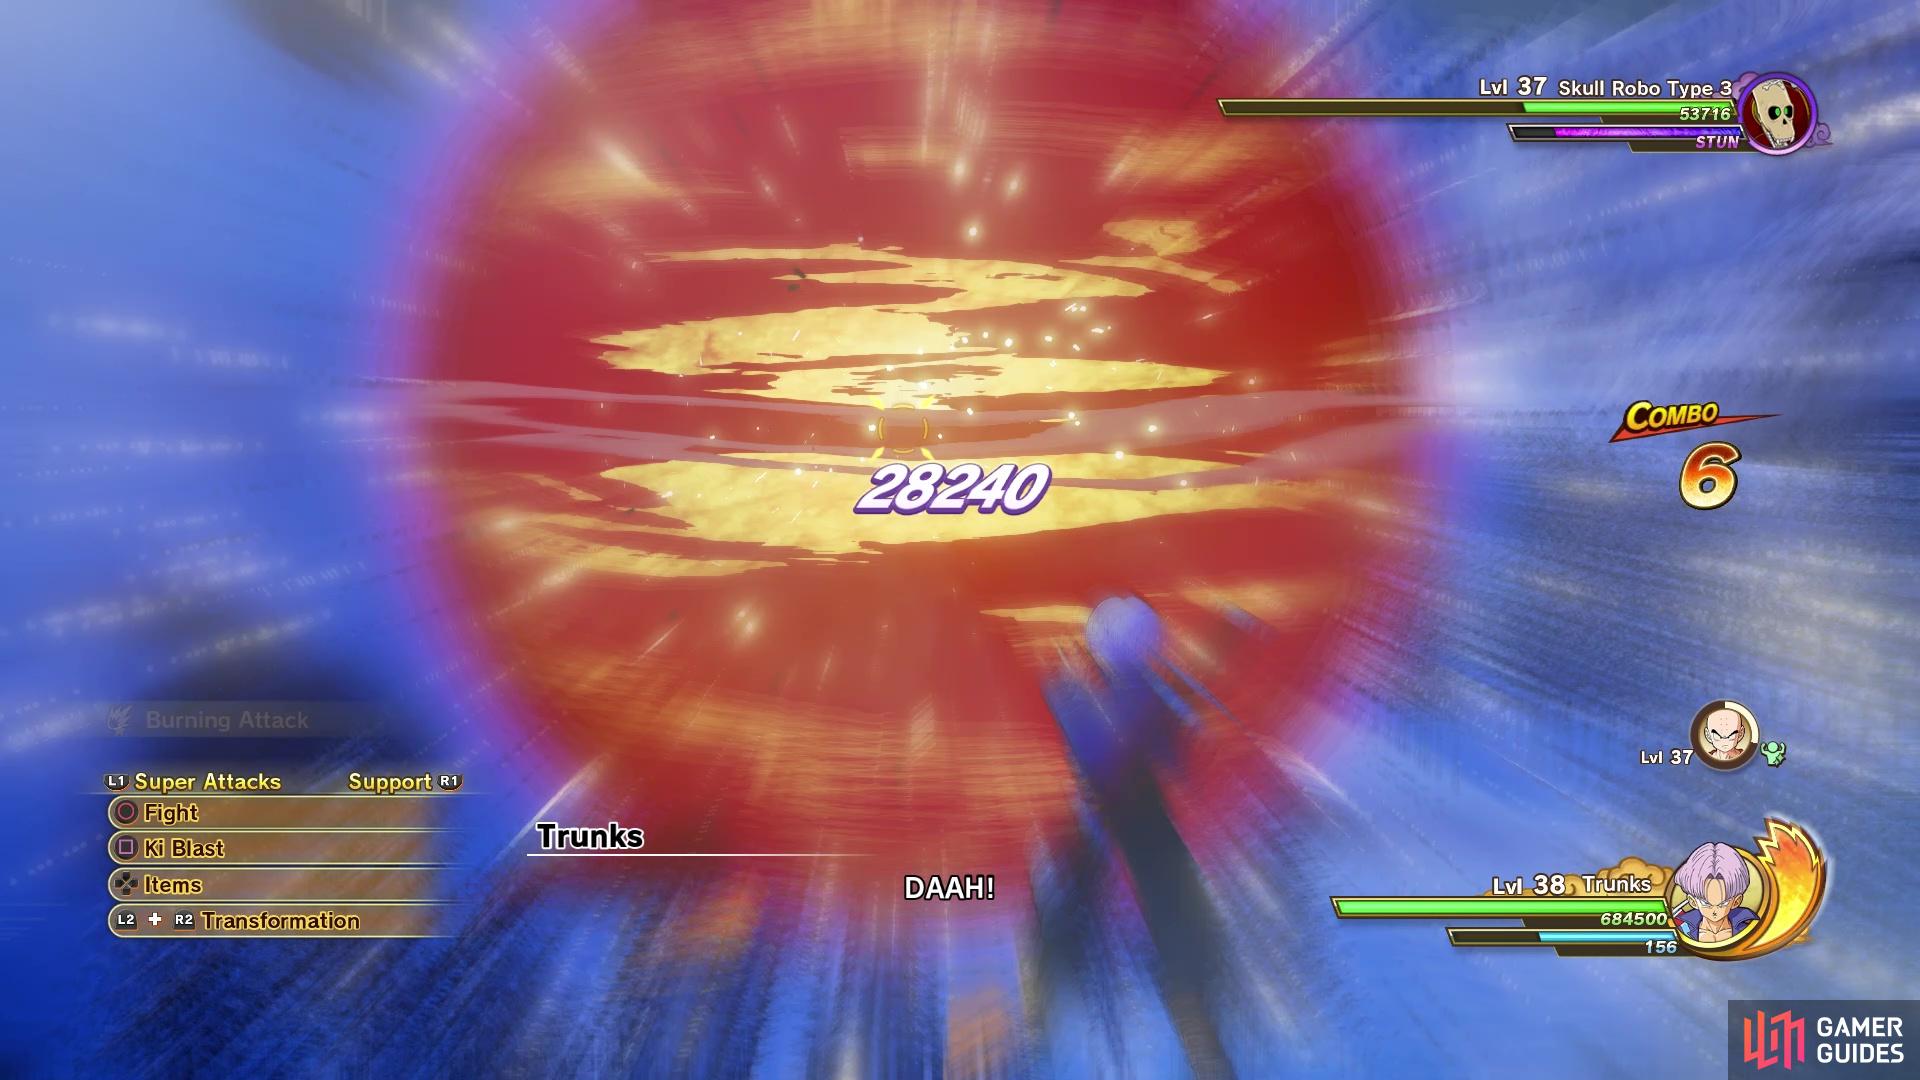 Trunks’ Burning Attack has a good area of effect to hit more than one robot